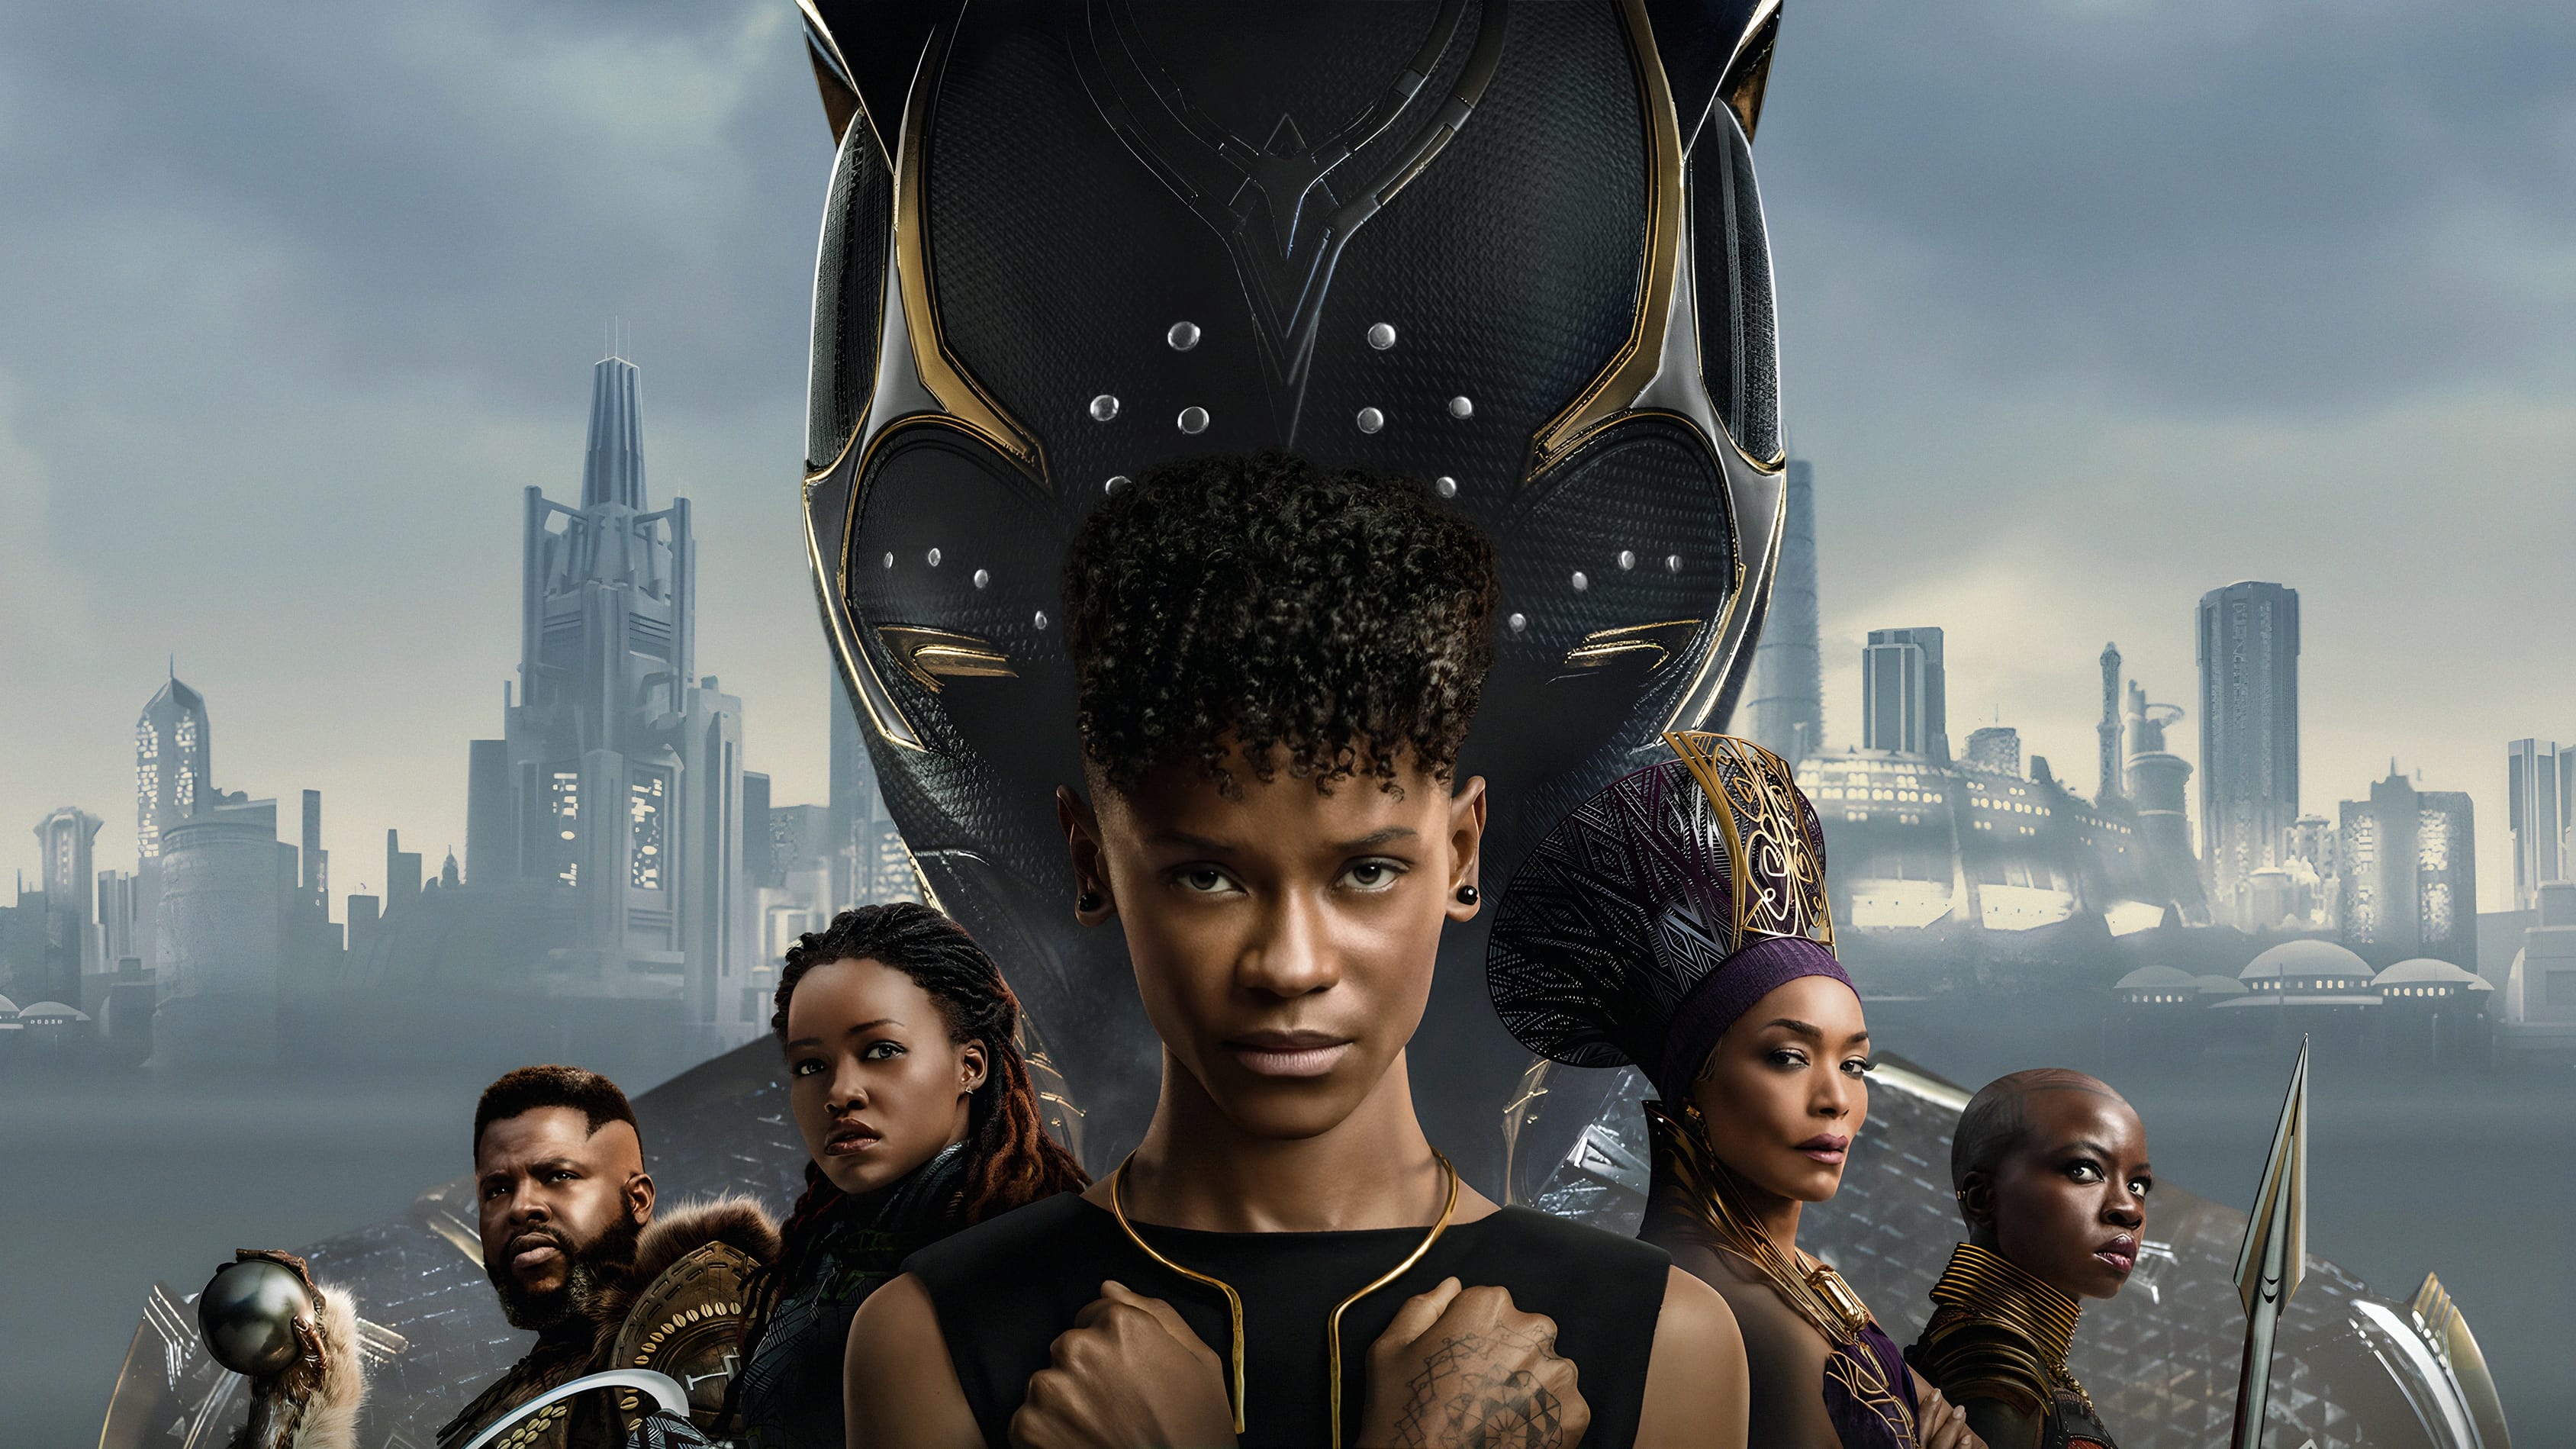 black panther 2 full movie free download youtube